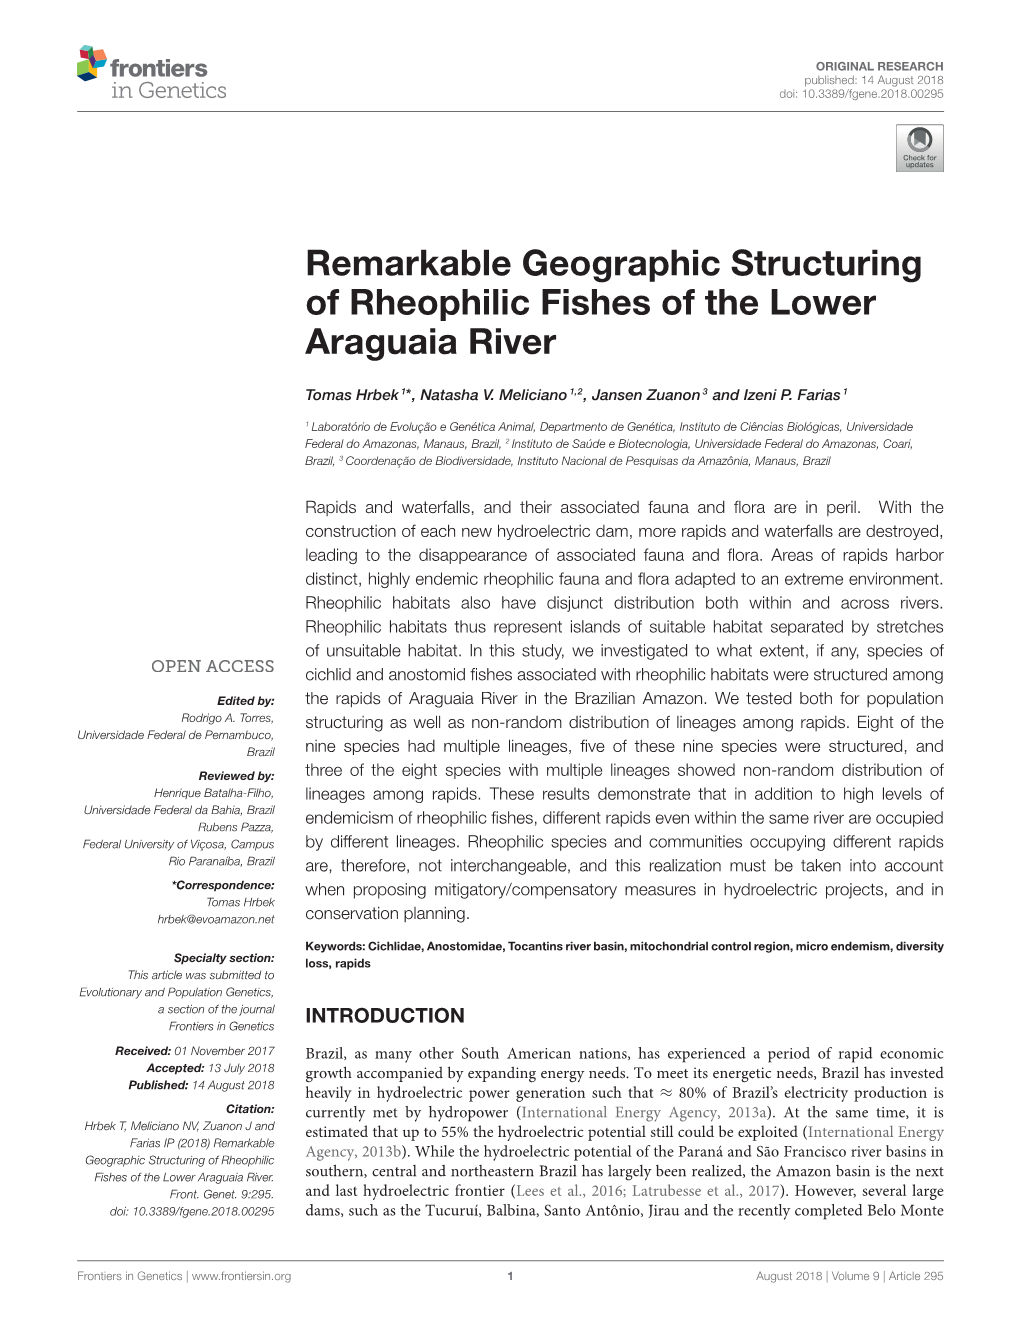 Remarkable Geographic Structuring of Rheophilic Fishes of the Lower Araguaia River